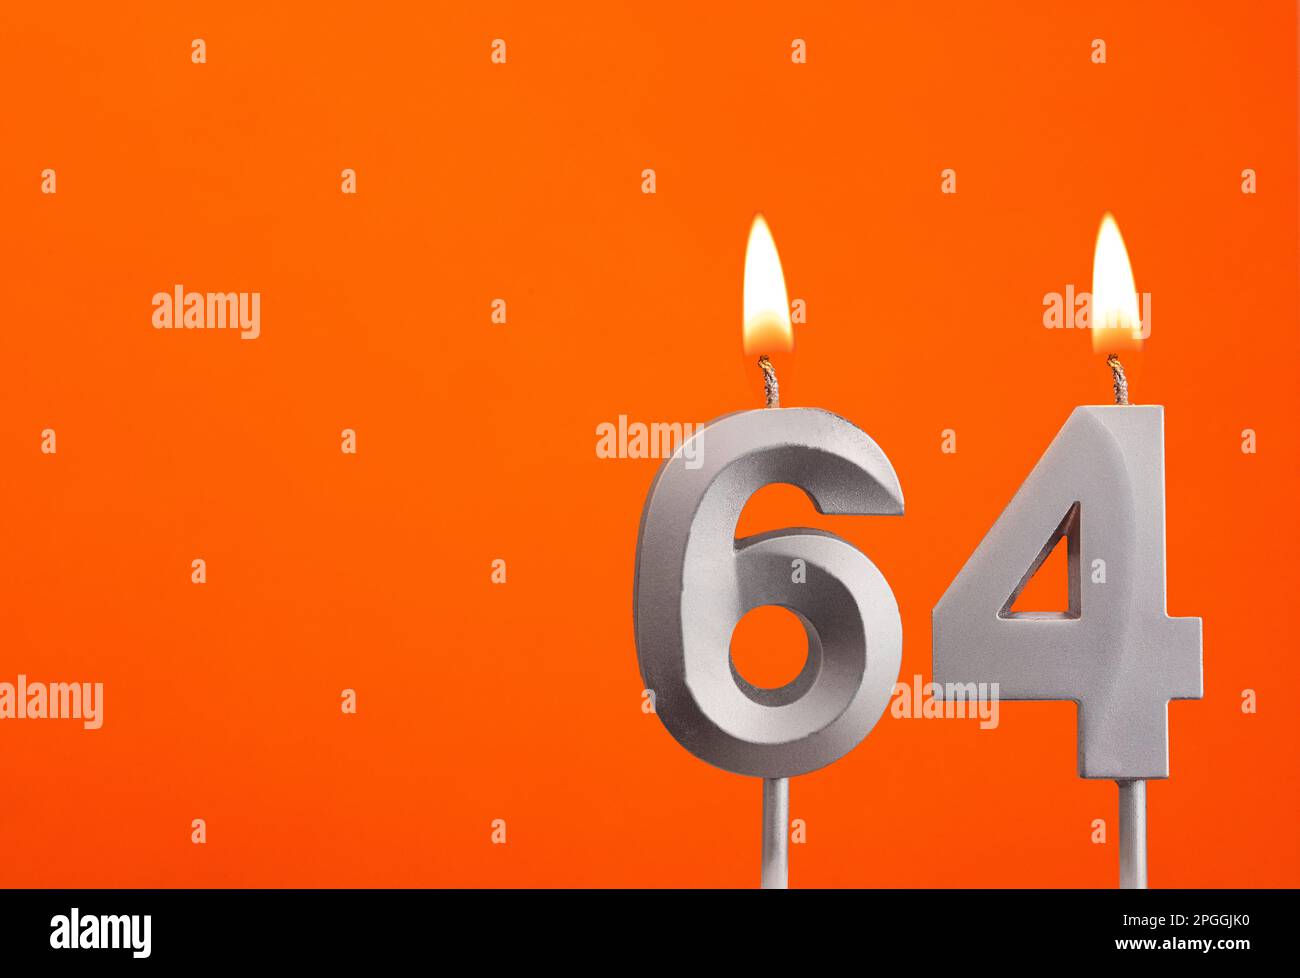 Candle number 64 - Birthday in orange background Stock Photo